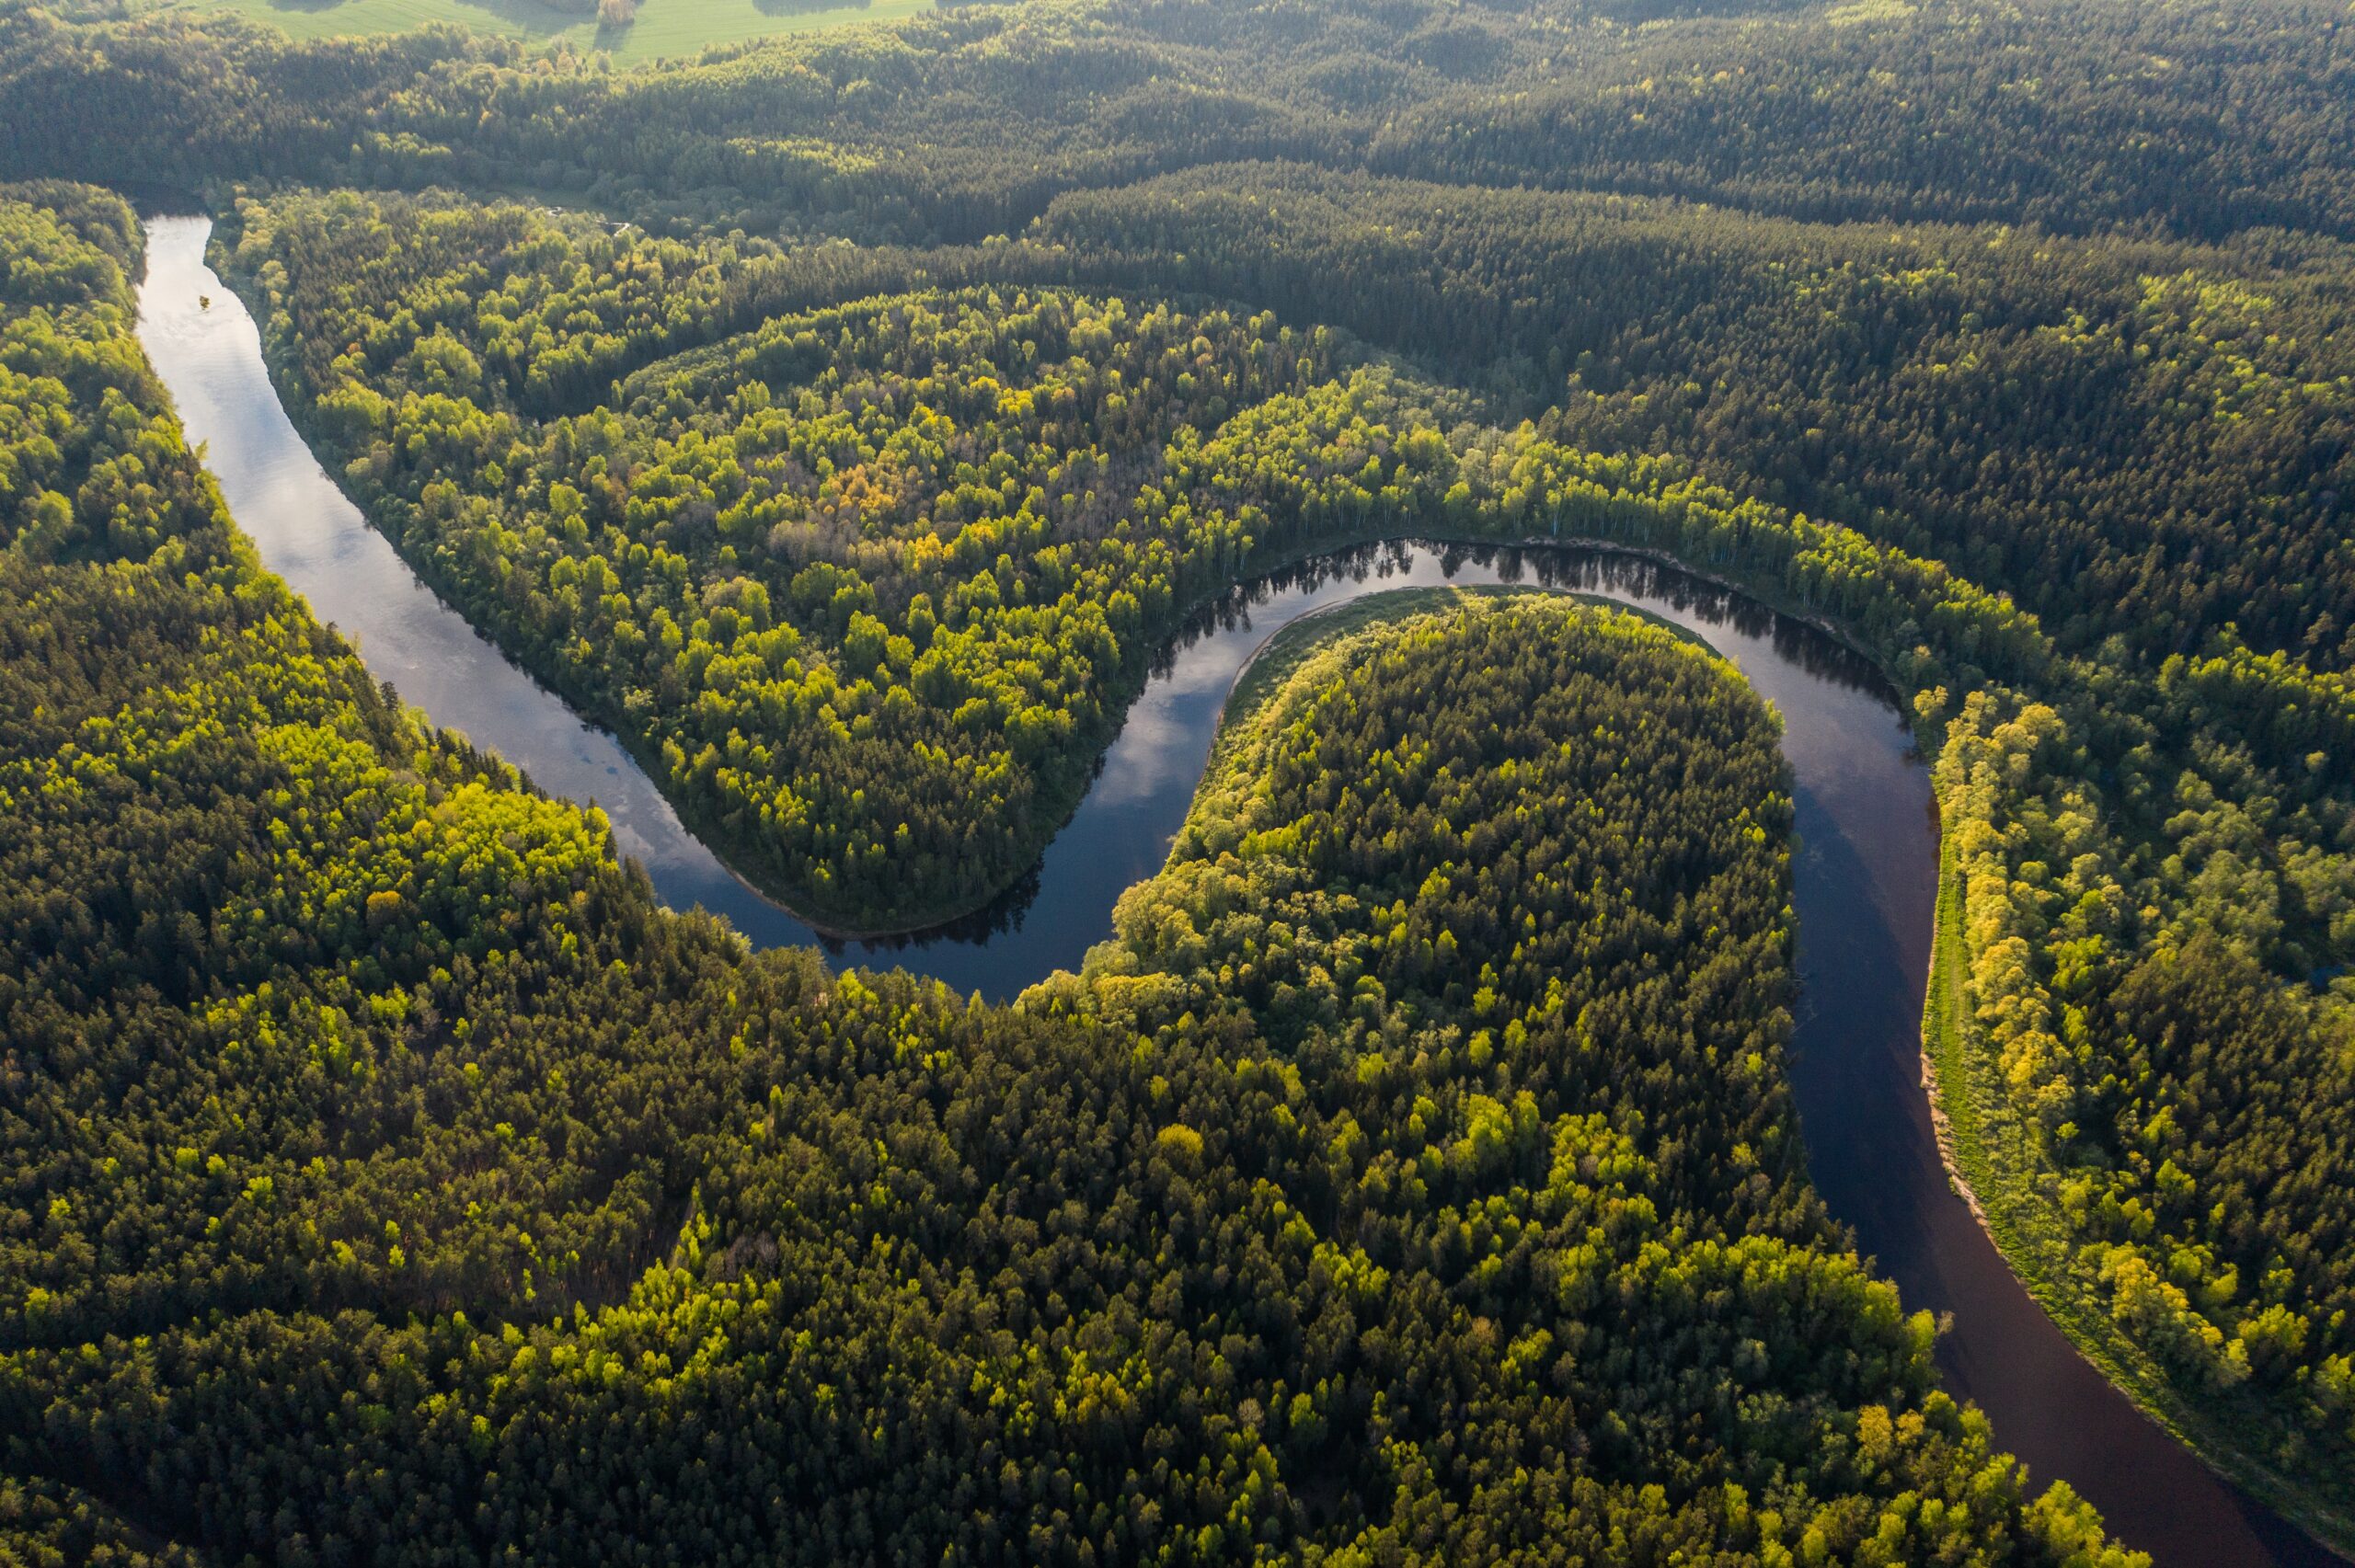 overhead view of a winding river surrounded by trees